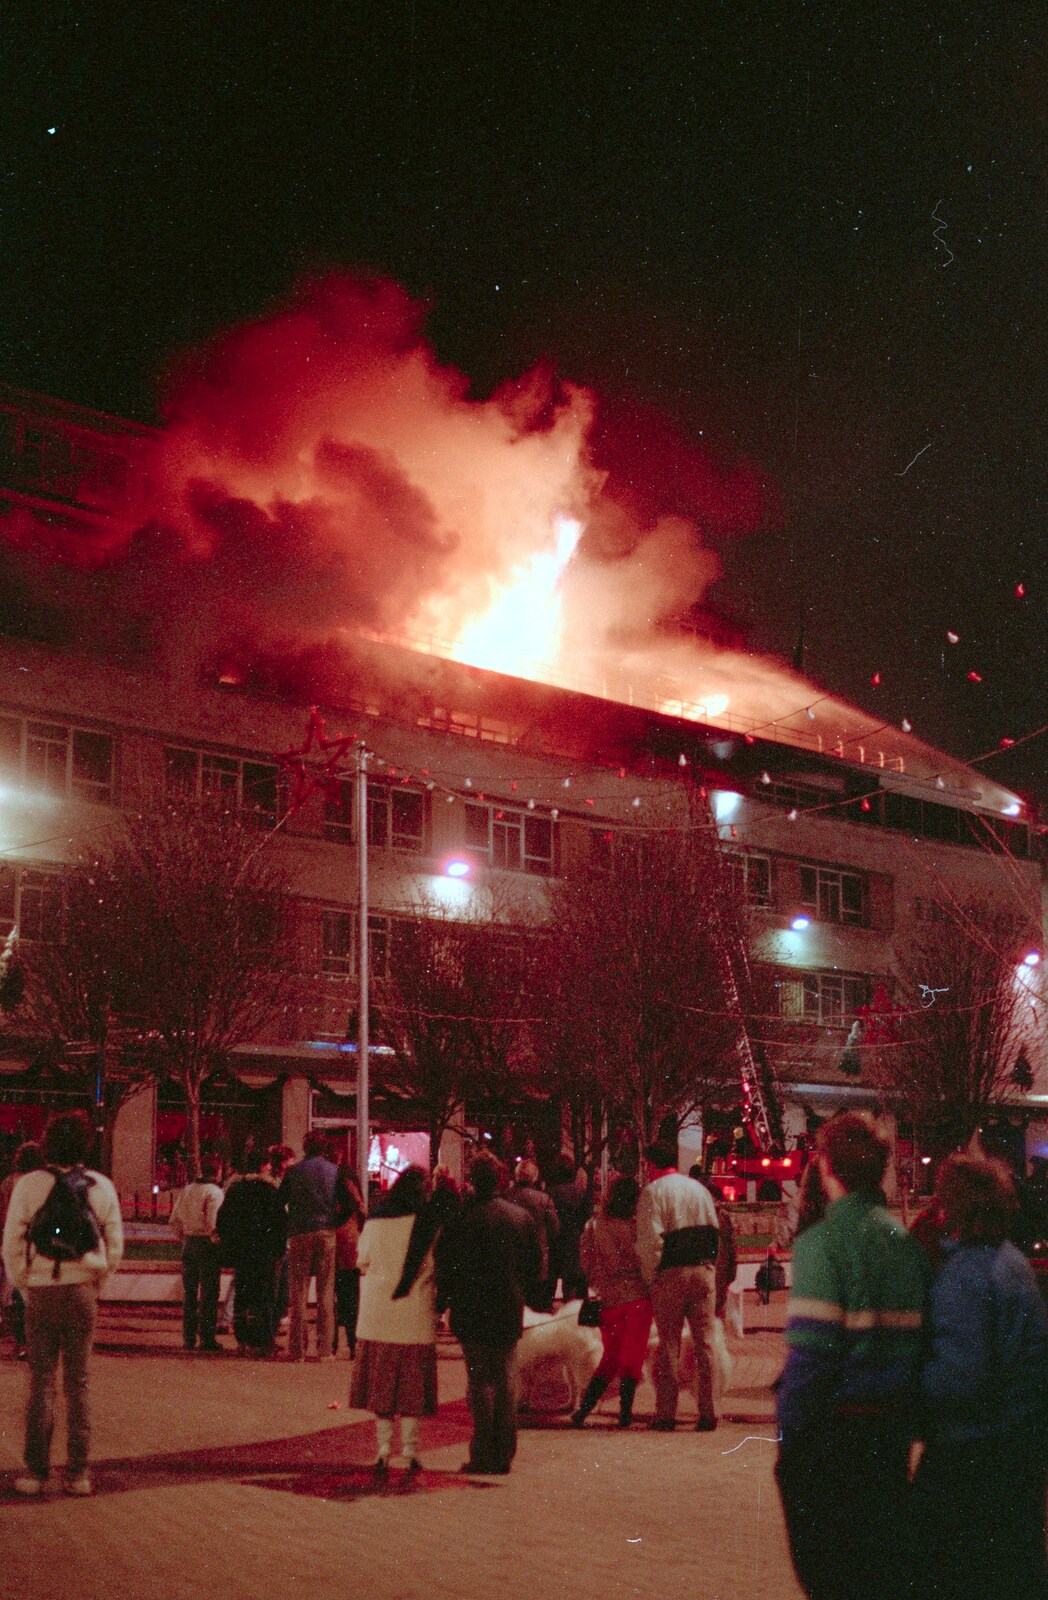 The top-floor fire gets worse from Uni: The Fire-Bombing of Dingles, Plymouth, Devon - 19th December 1988